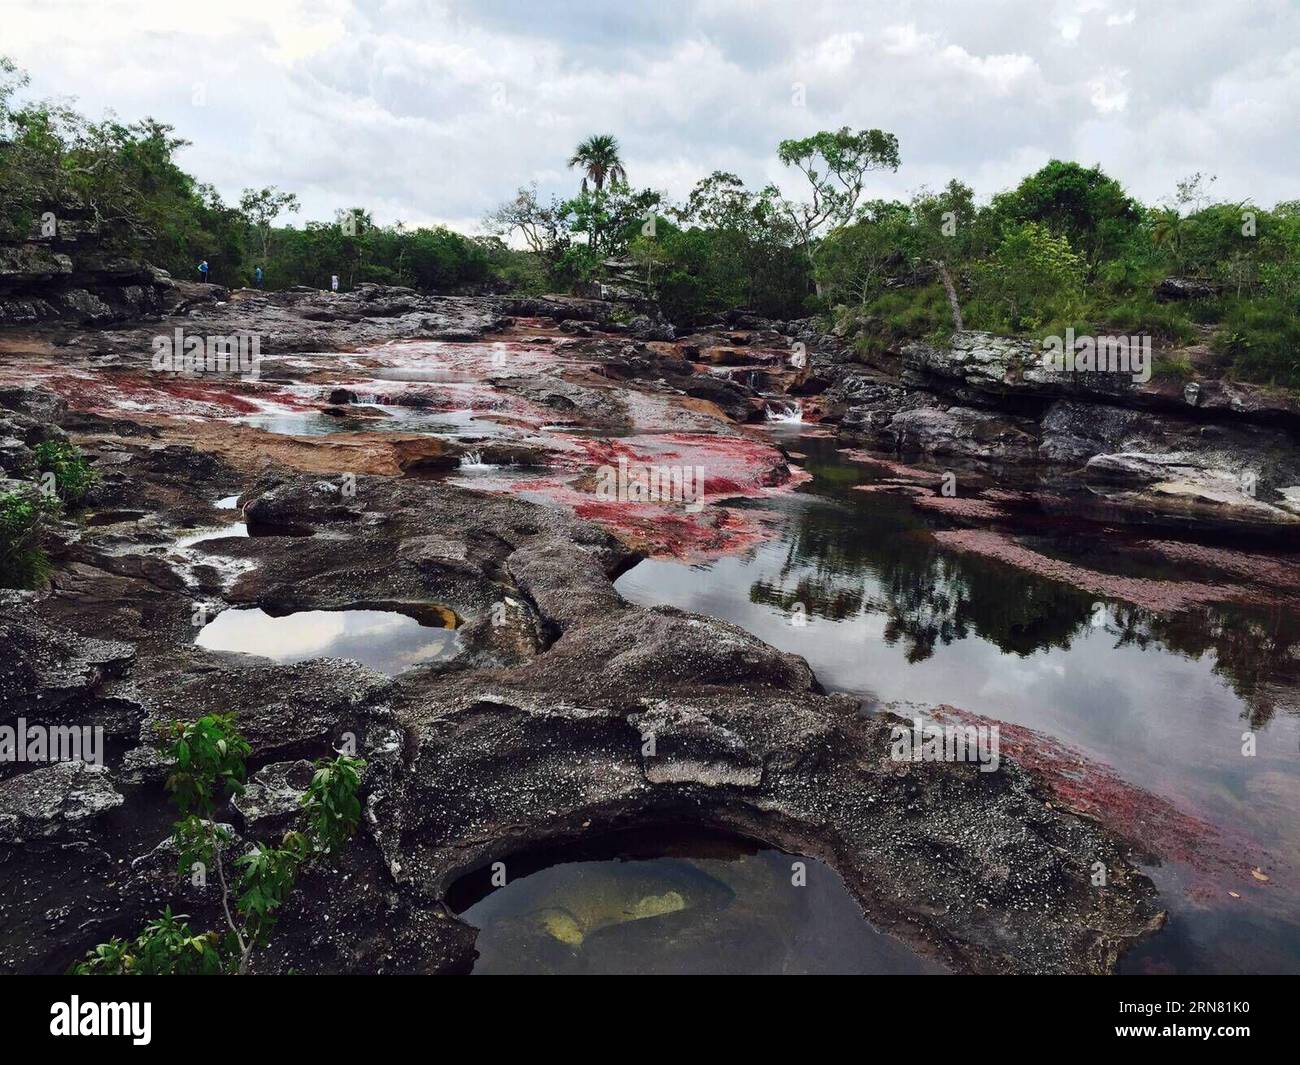 (150930) -- META, Sept. 30, 2015 -- Photo taken on Sept. 29, 2015 shows the Cano Cristales river in La Macarena, Meta, Colombia. According to local press, the access to Cano Cristales will be prohibited from next Oct. 1 because the flow is at the minimum of 30 percent due to El nino phenomenon. )(rhj) COLOMBIA-META-ENVIRONMENT-CANO CRISTALES COLPRENSA PUBLICATIONxNOTxINxCHN   Meta Sept 30 2015 Photo Taken ON Sept 29 2015 Shows The Cano  River in La Macarena Meta Colombia According to Local Press The Access to Cano  will Be Prohibited from Next OCT 1 because The Flow IS AT The Minimum of 30 per Stock Photo